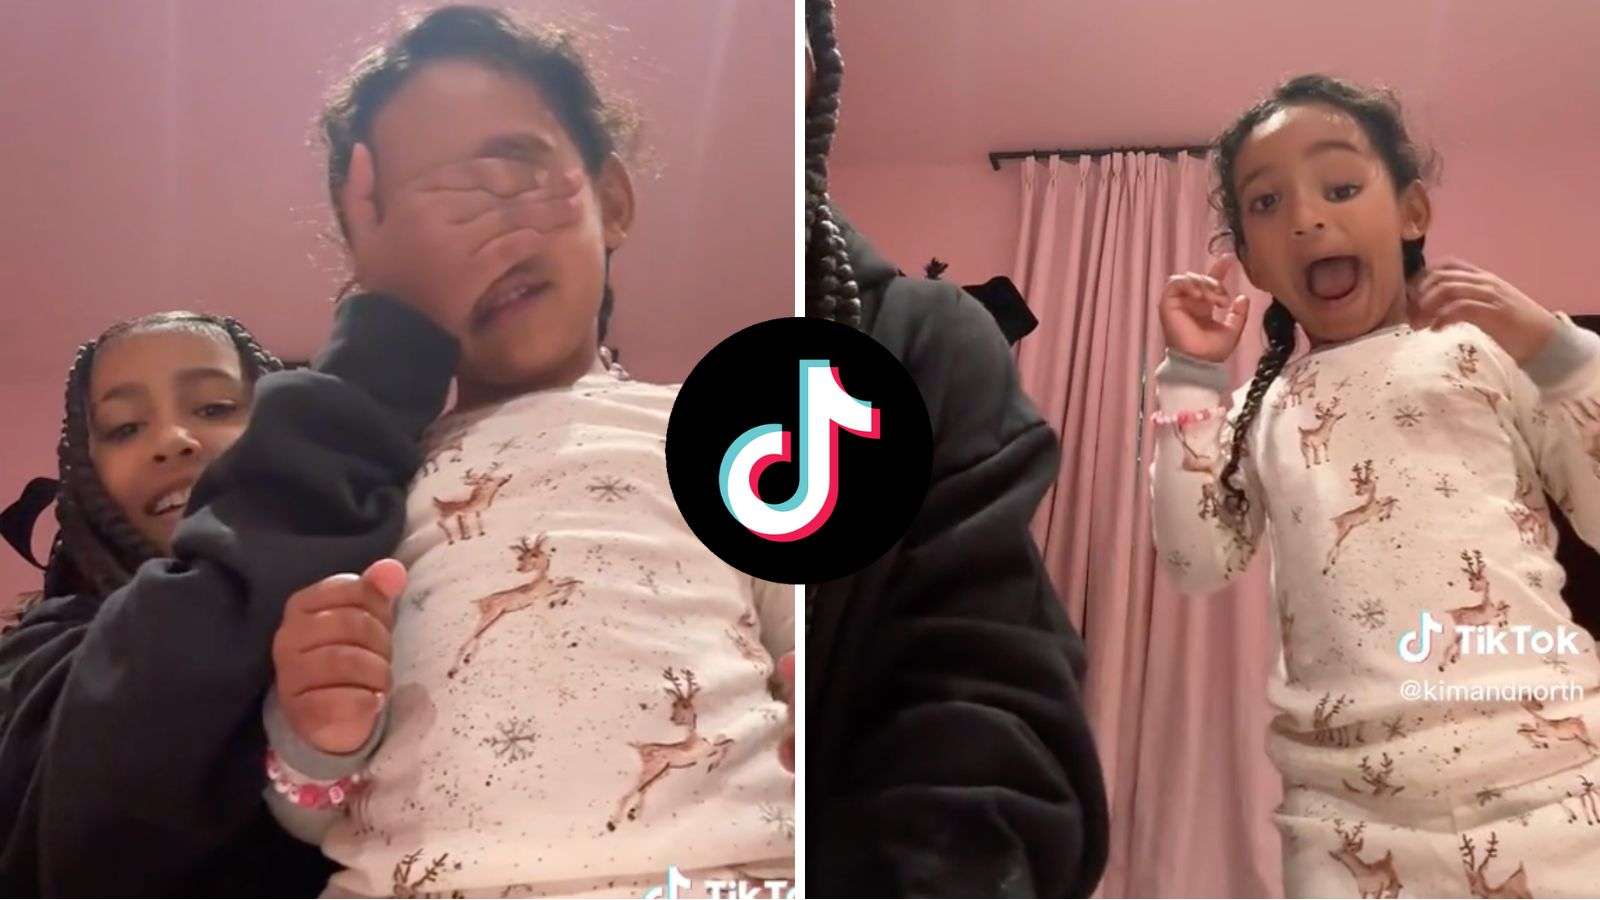 North West pulls hilarious prank on little sister Chicago with viral filter